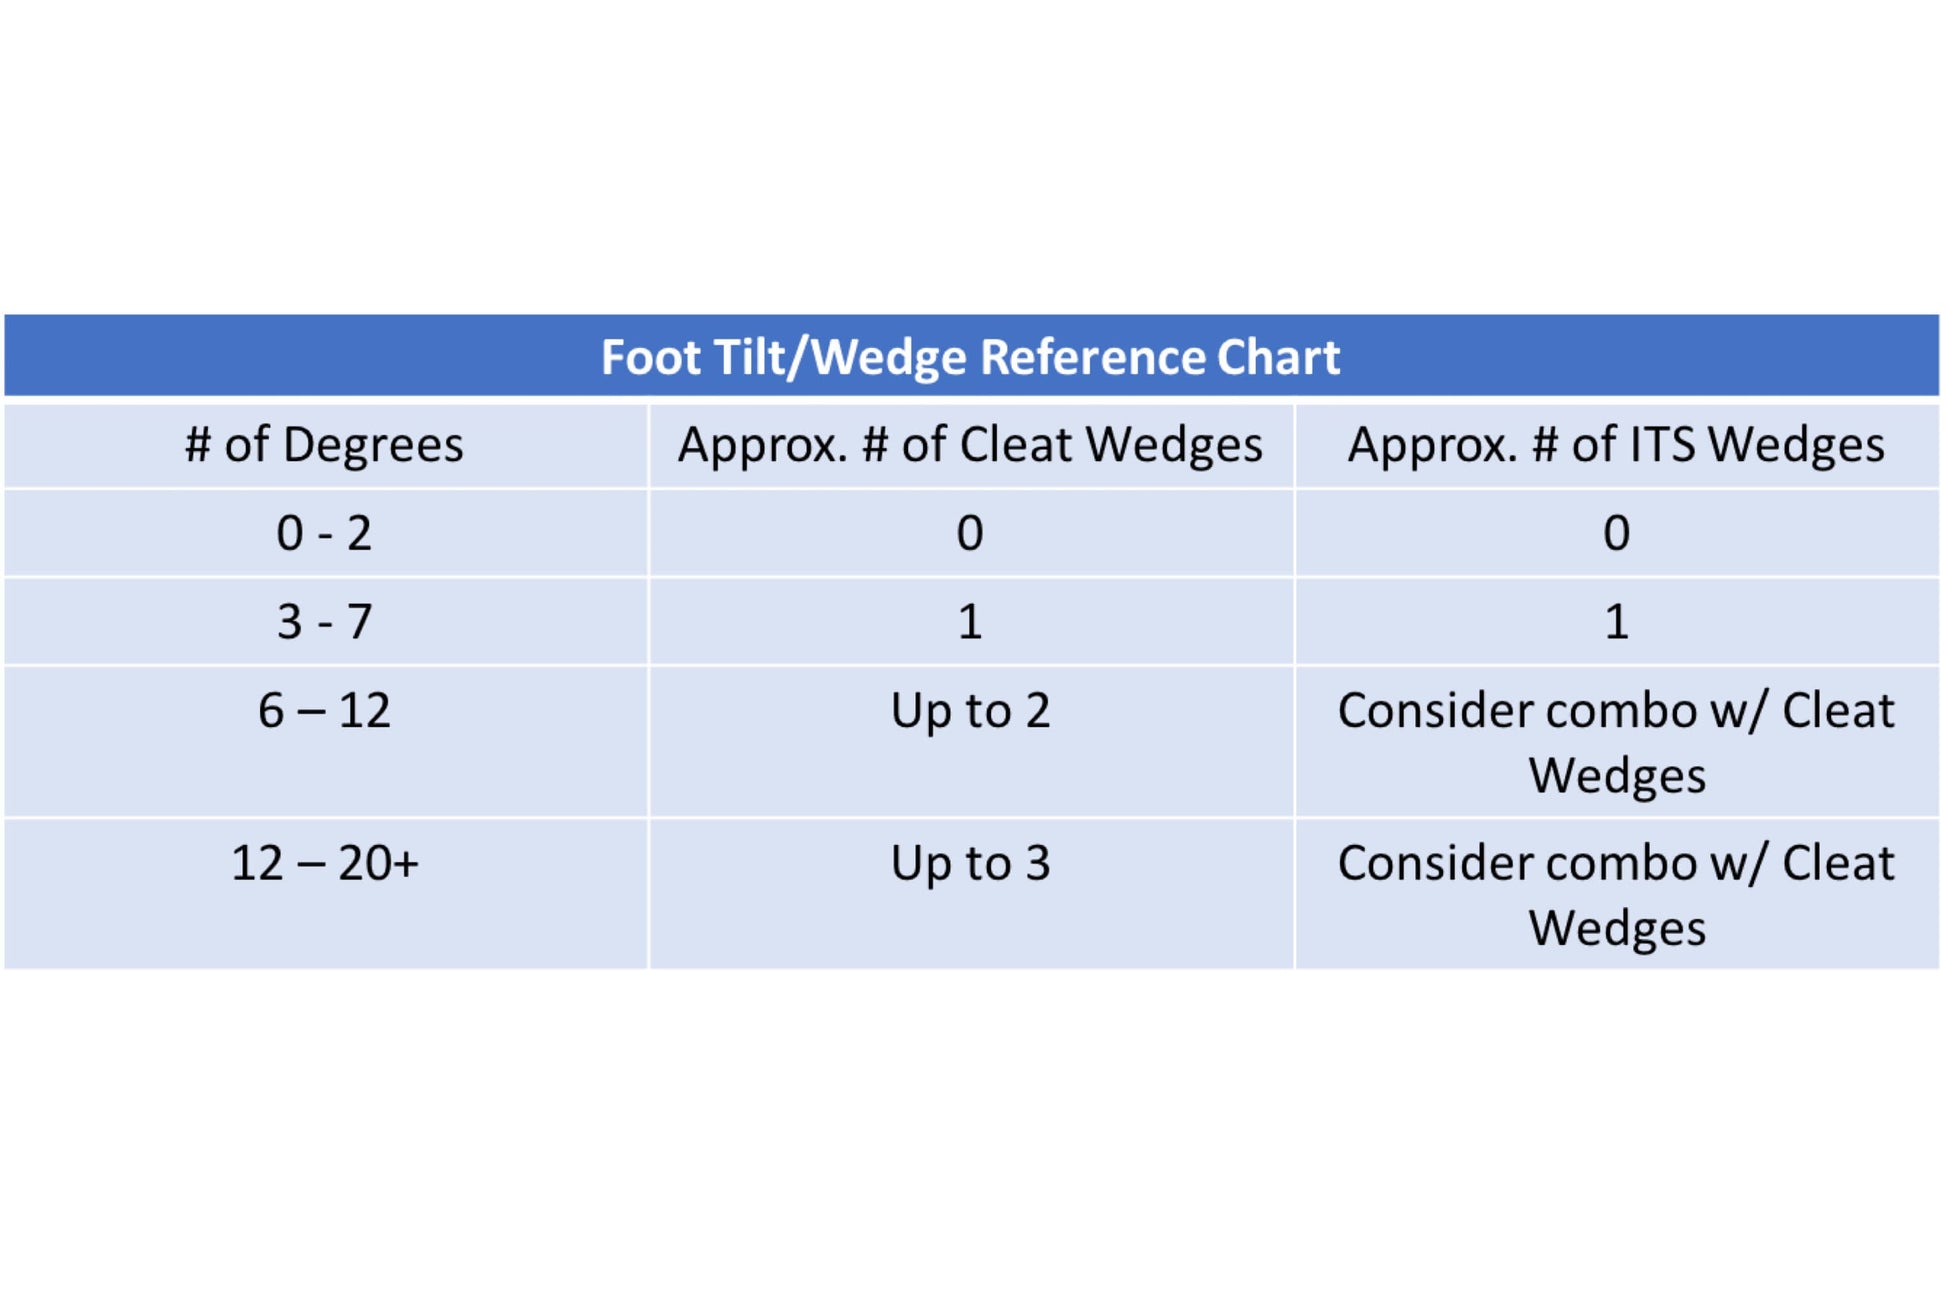 BikeFit Foot Tilt and Wedge Reference Chart